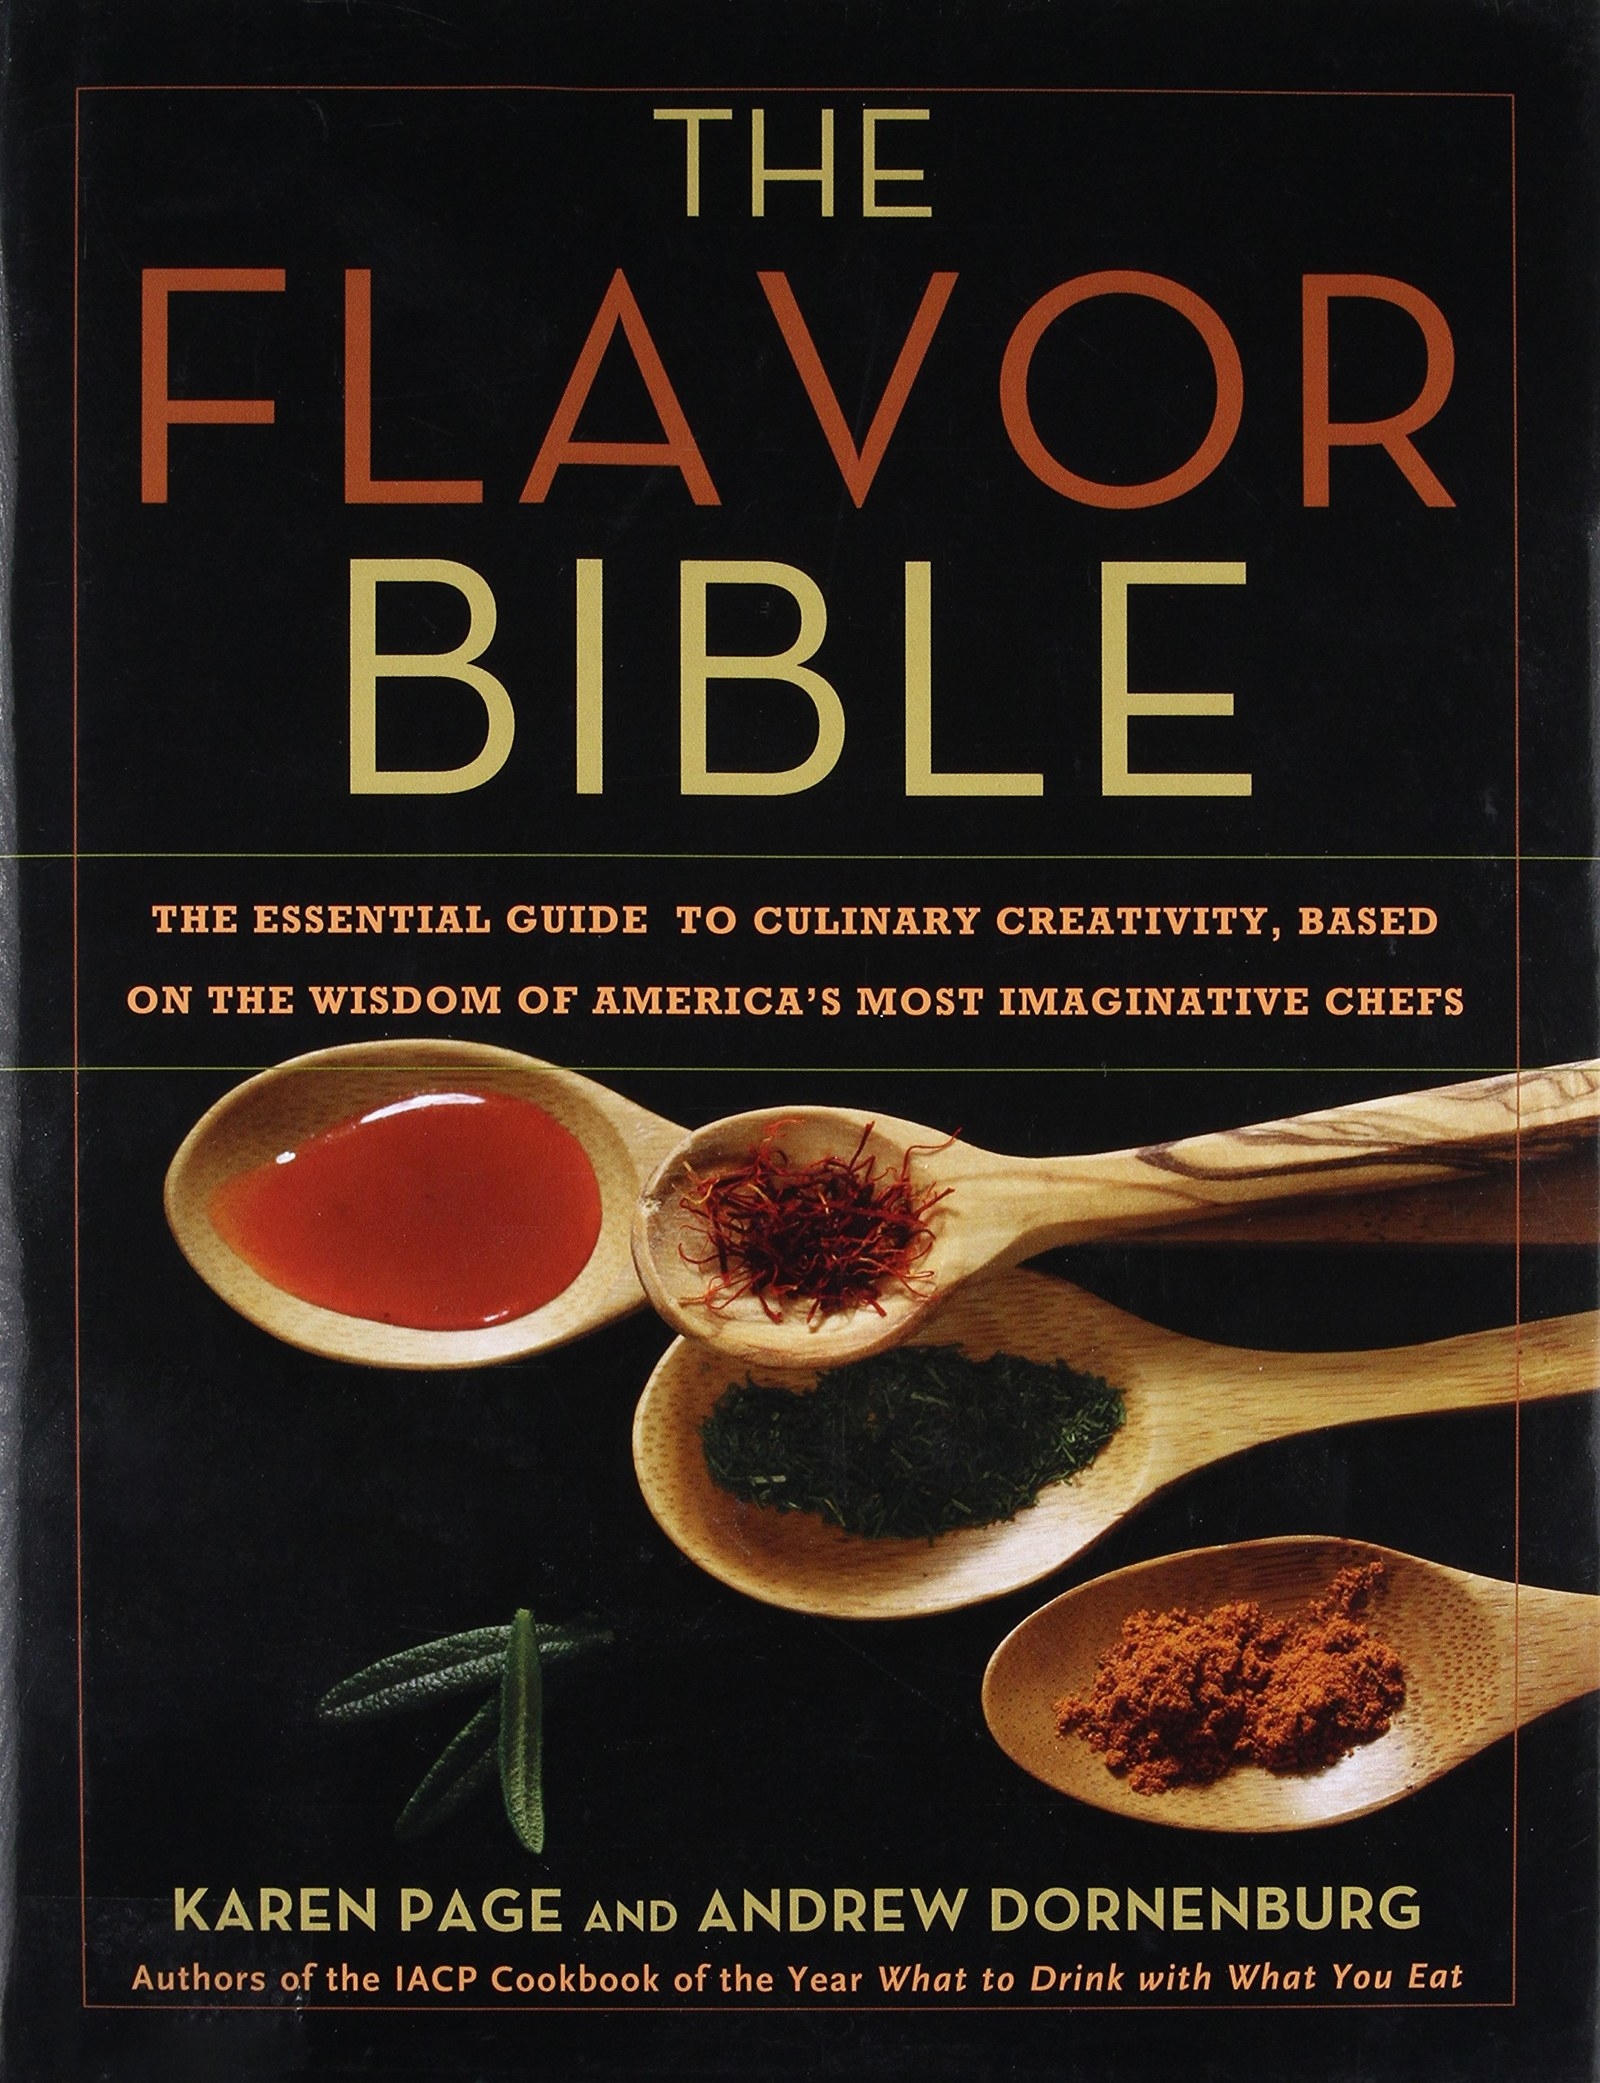 The cover of the book with text &quot;the essential guide to culinary creativity, based on the wisdom of America&#x27;s most imaginative chefs&quot;